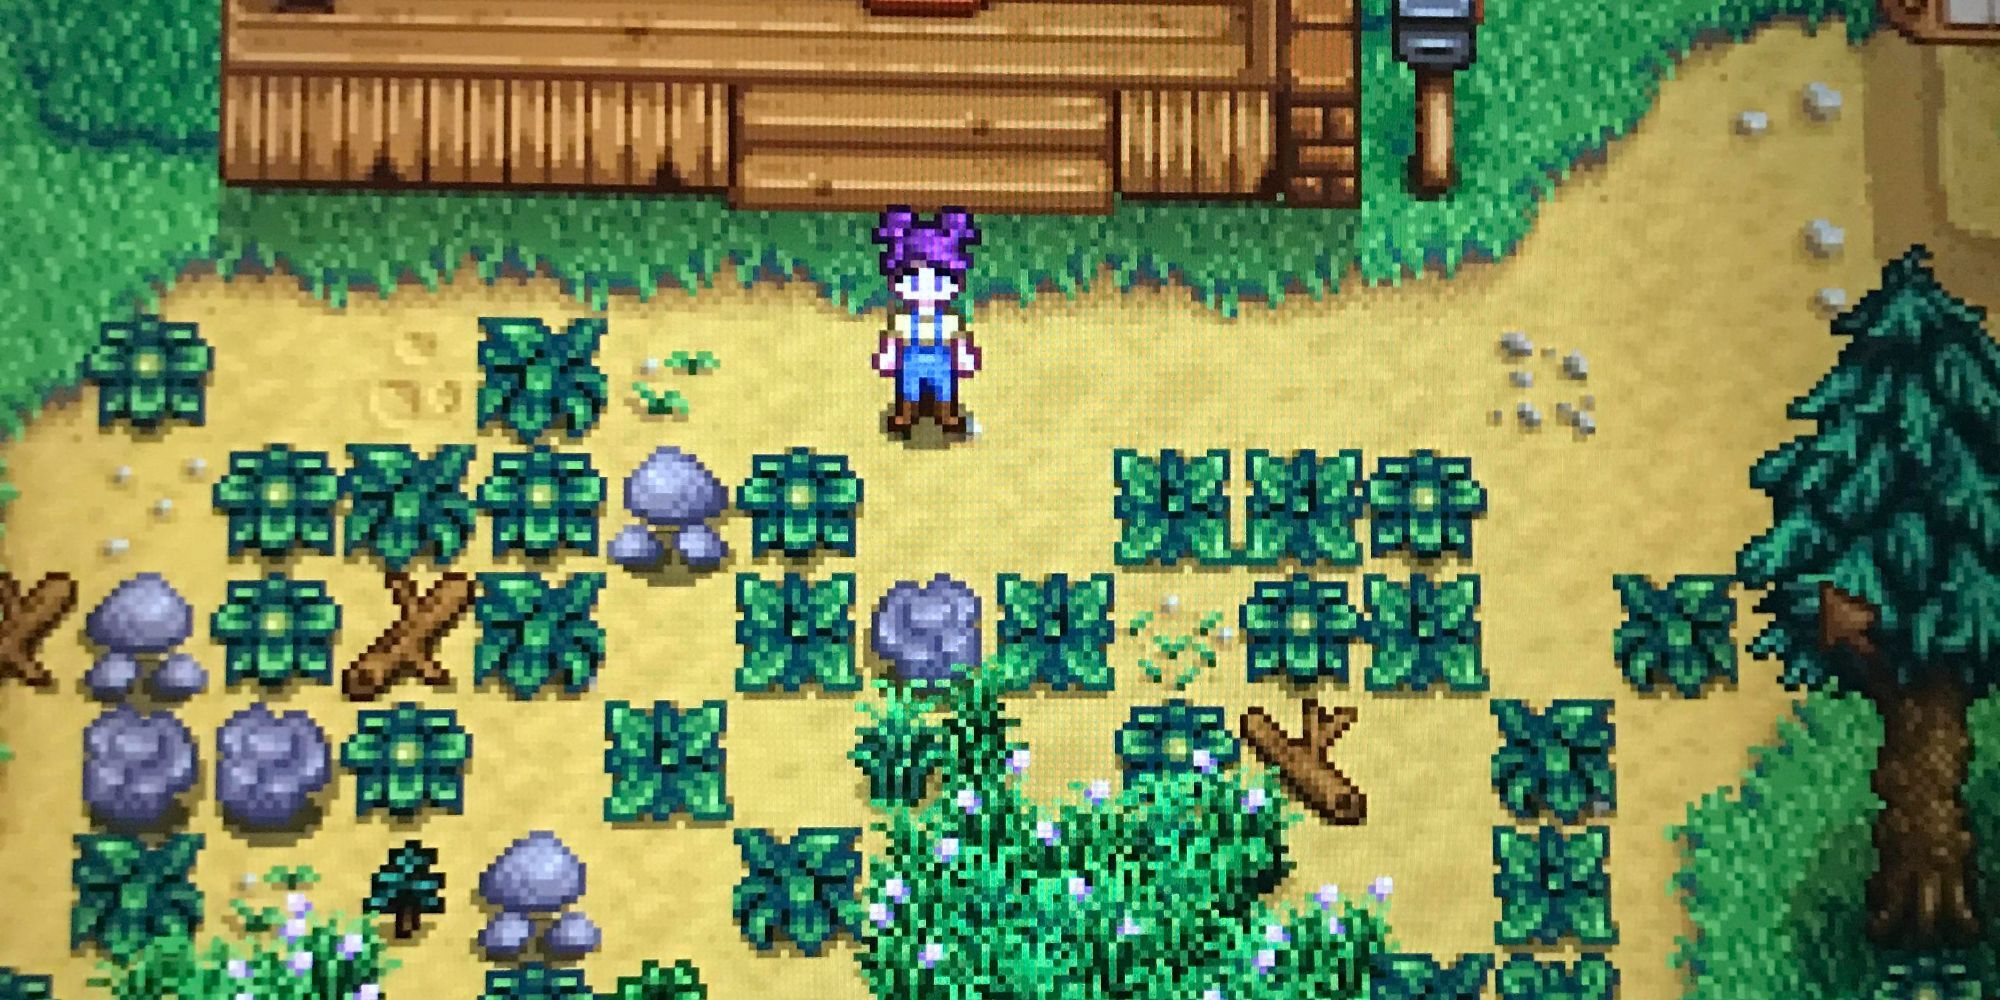 A farmer in a field filled with rocks, logs, and weeds in Stardew Valley